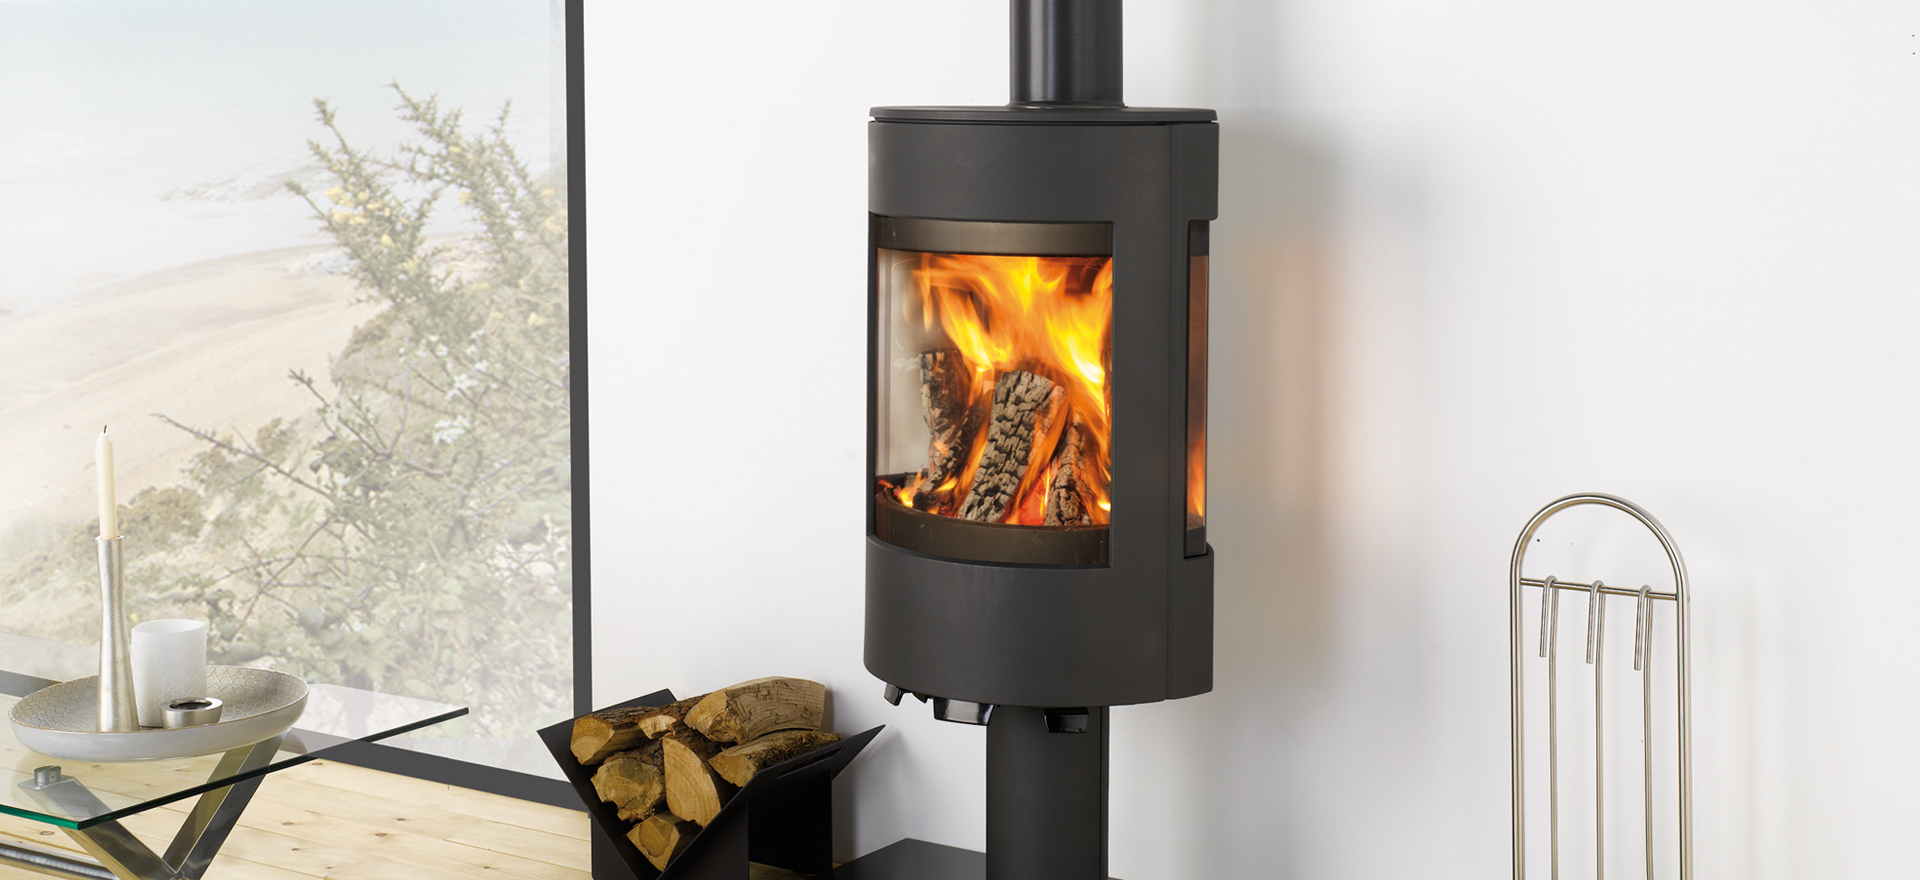 Modern Scandinavian Wood Stoves : 15 Hanging And Freestanding Fireplaces To Keep You Warm ...